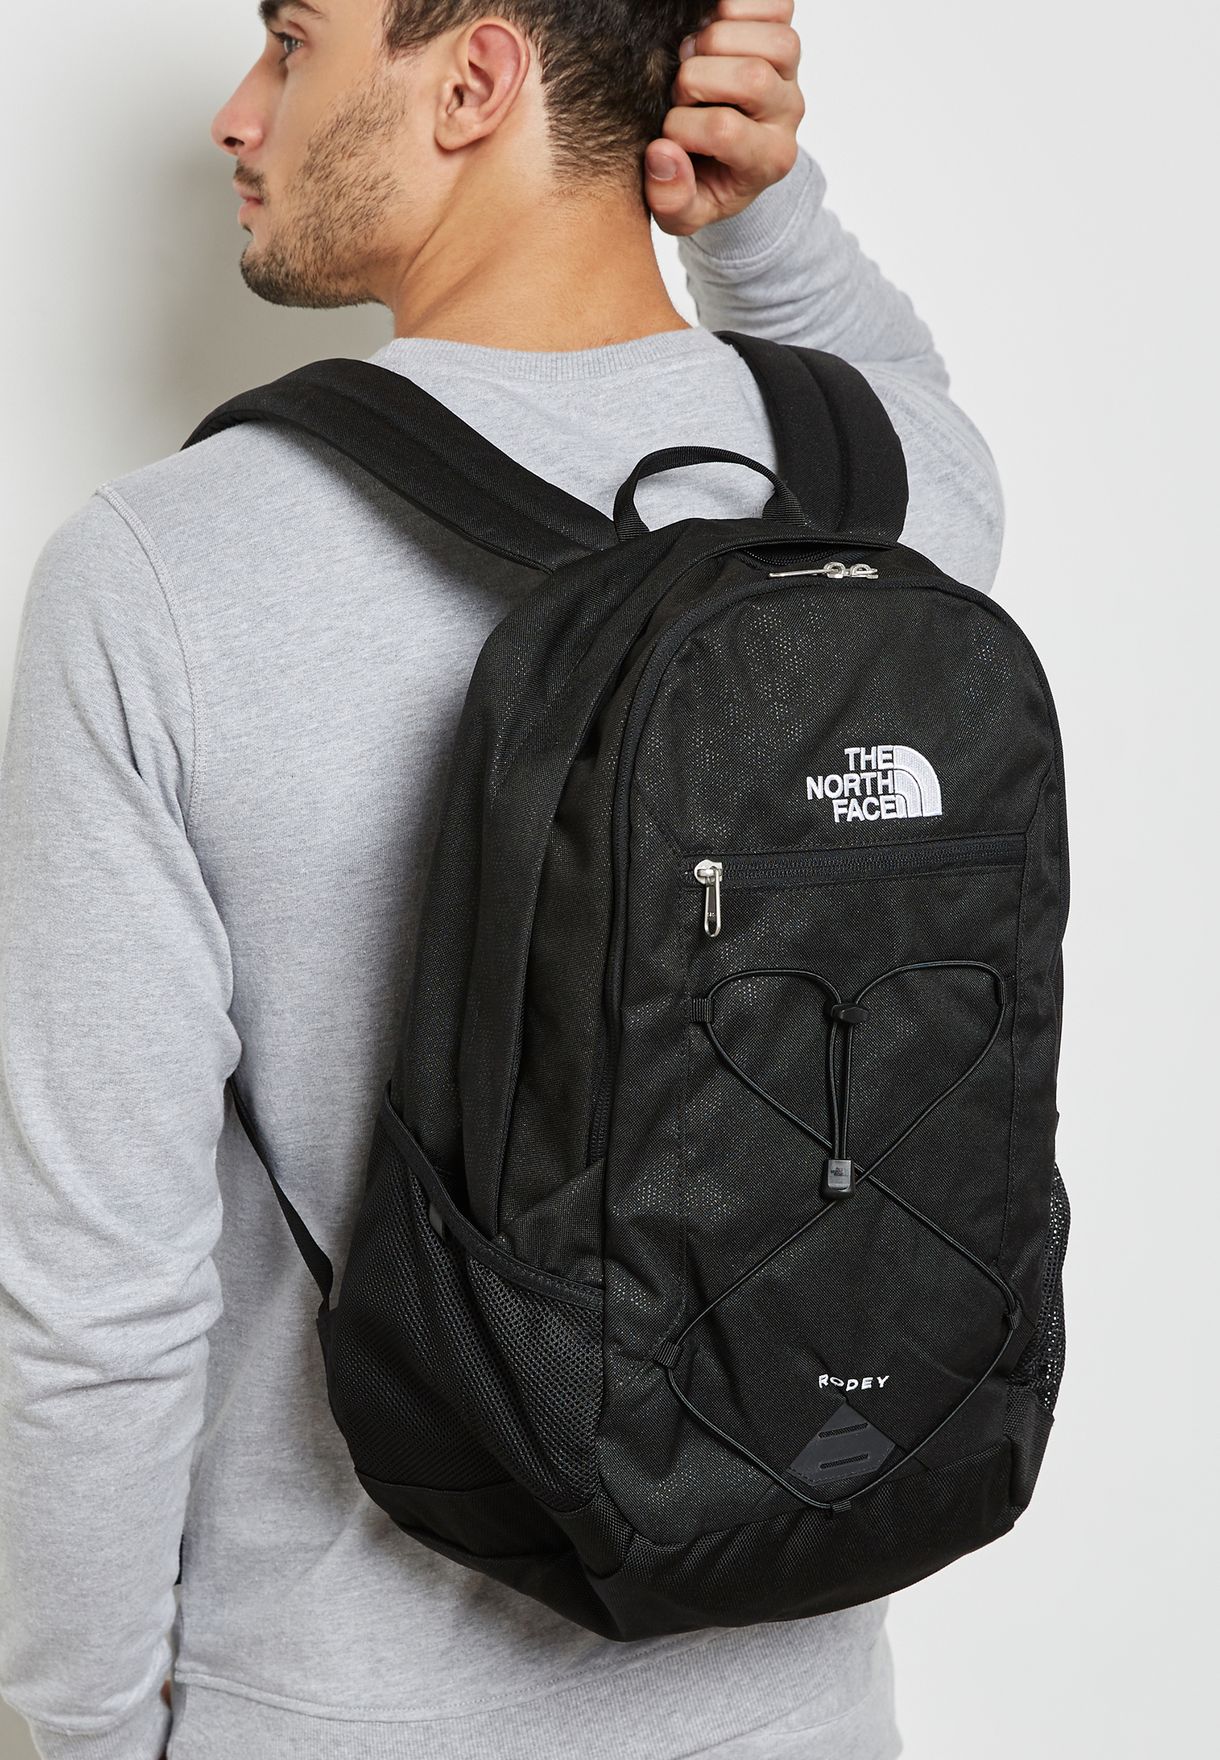 the north face rodey backpack review